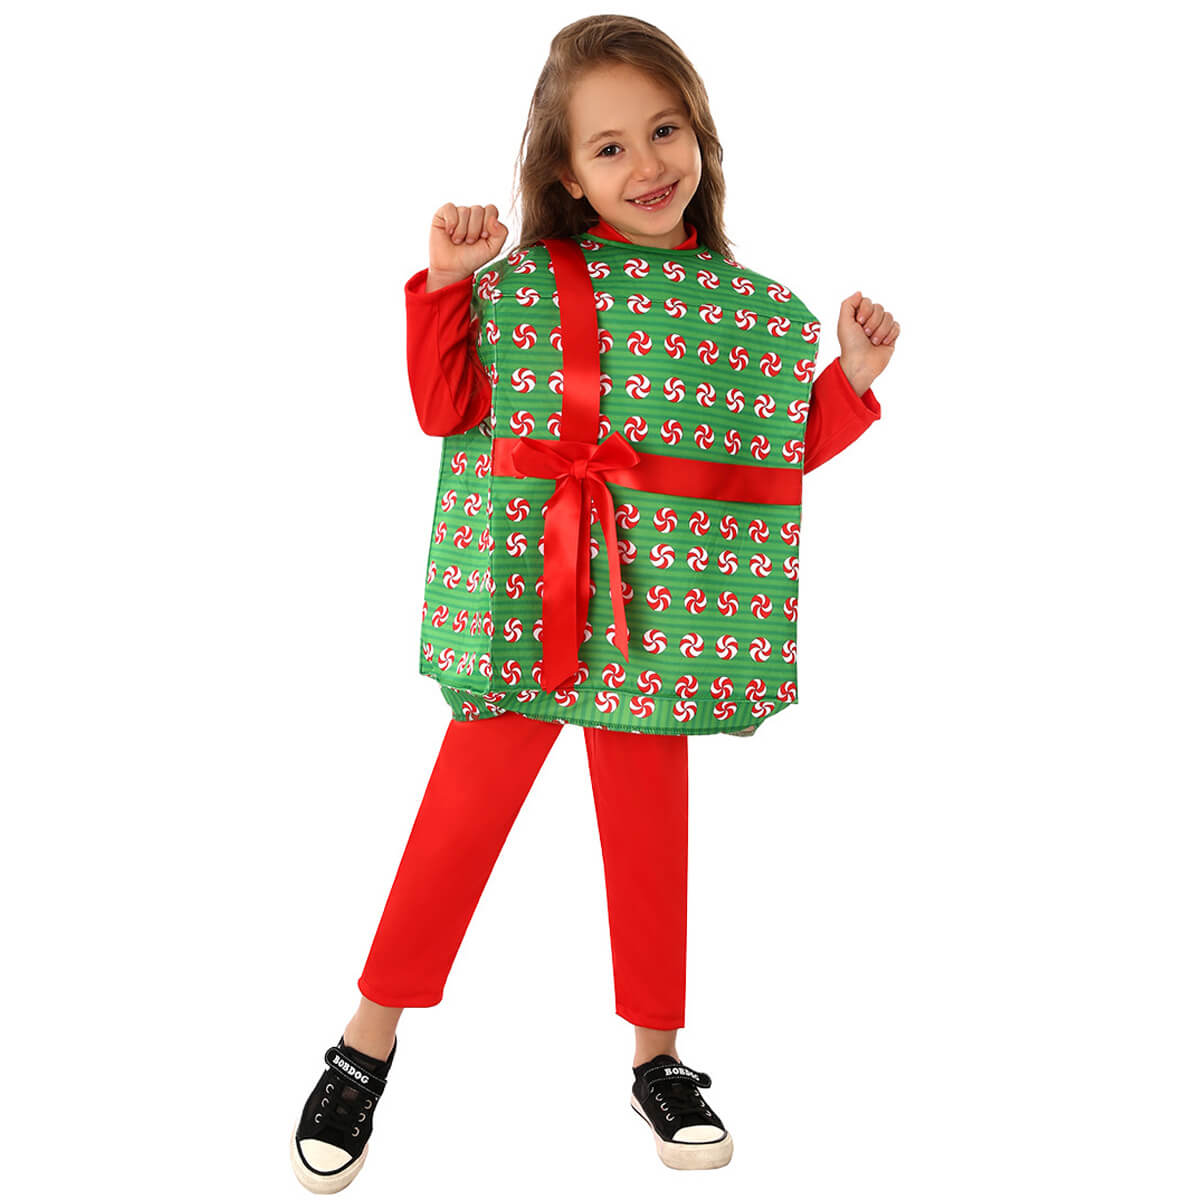 Buy Kaku Fancy Dresses Santa Clause Christmas Day Costume in Velvet Fabric  with Cap, Belt, Beard and Bag - Red & White, 10-12 Years, For Boy's Online  at Low Prices in India -